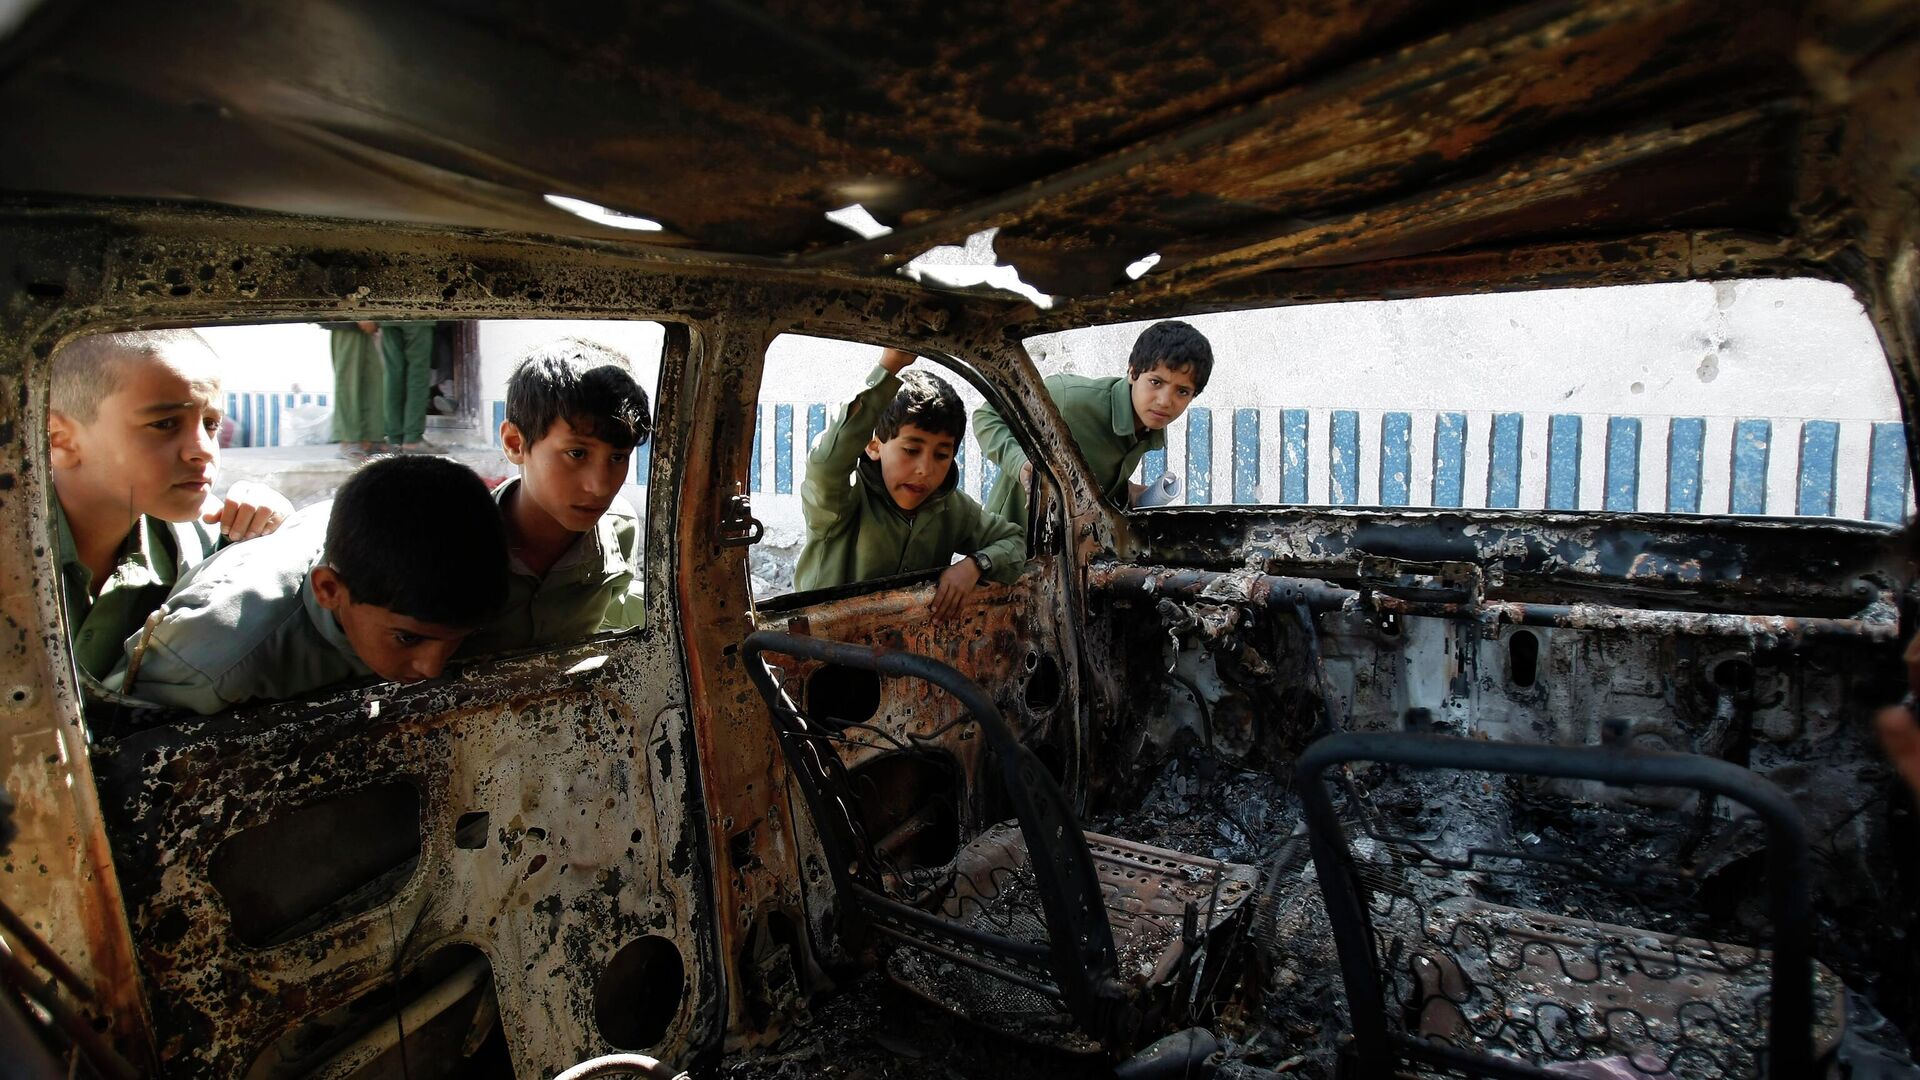 FILE – This May 27, 2014, file photo shows Yemeni boys looking at a vehicle destroyed during a police raid on an al-Qaida militants' hideout in the Arhab region, north of Sanaa, Yemen, which resulted in the death of five militants and six soldiers. According to the Obama administration’s most recent terrorism report, released by the State Department in late April, al-Qaida's core leadership has been degraded, limiting its ability to launch attacks and lead its followers. This has resulted in more autonomous and more aggressive affiliates, notably in Yemen, Syria, Iraq, northwest Africa and Somalia, according to the report, which recorded a 43 percent increase in terrorist attacks worldwide from 2012 to 2013. (AP Photo/Hani Mohammed) - Sputnik International, 1920, 01.04.2023